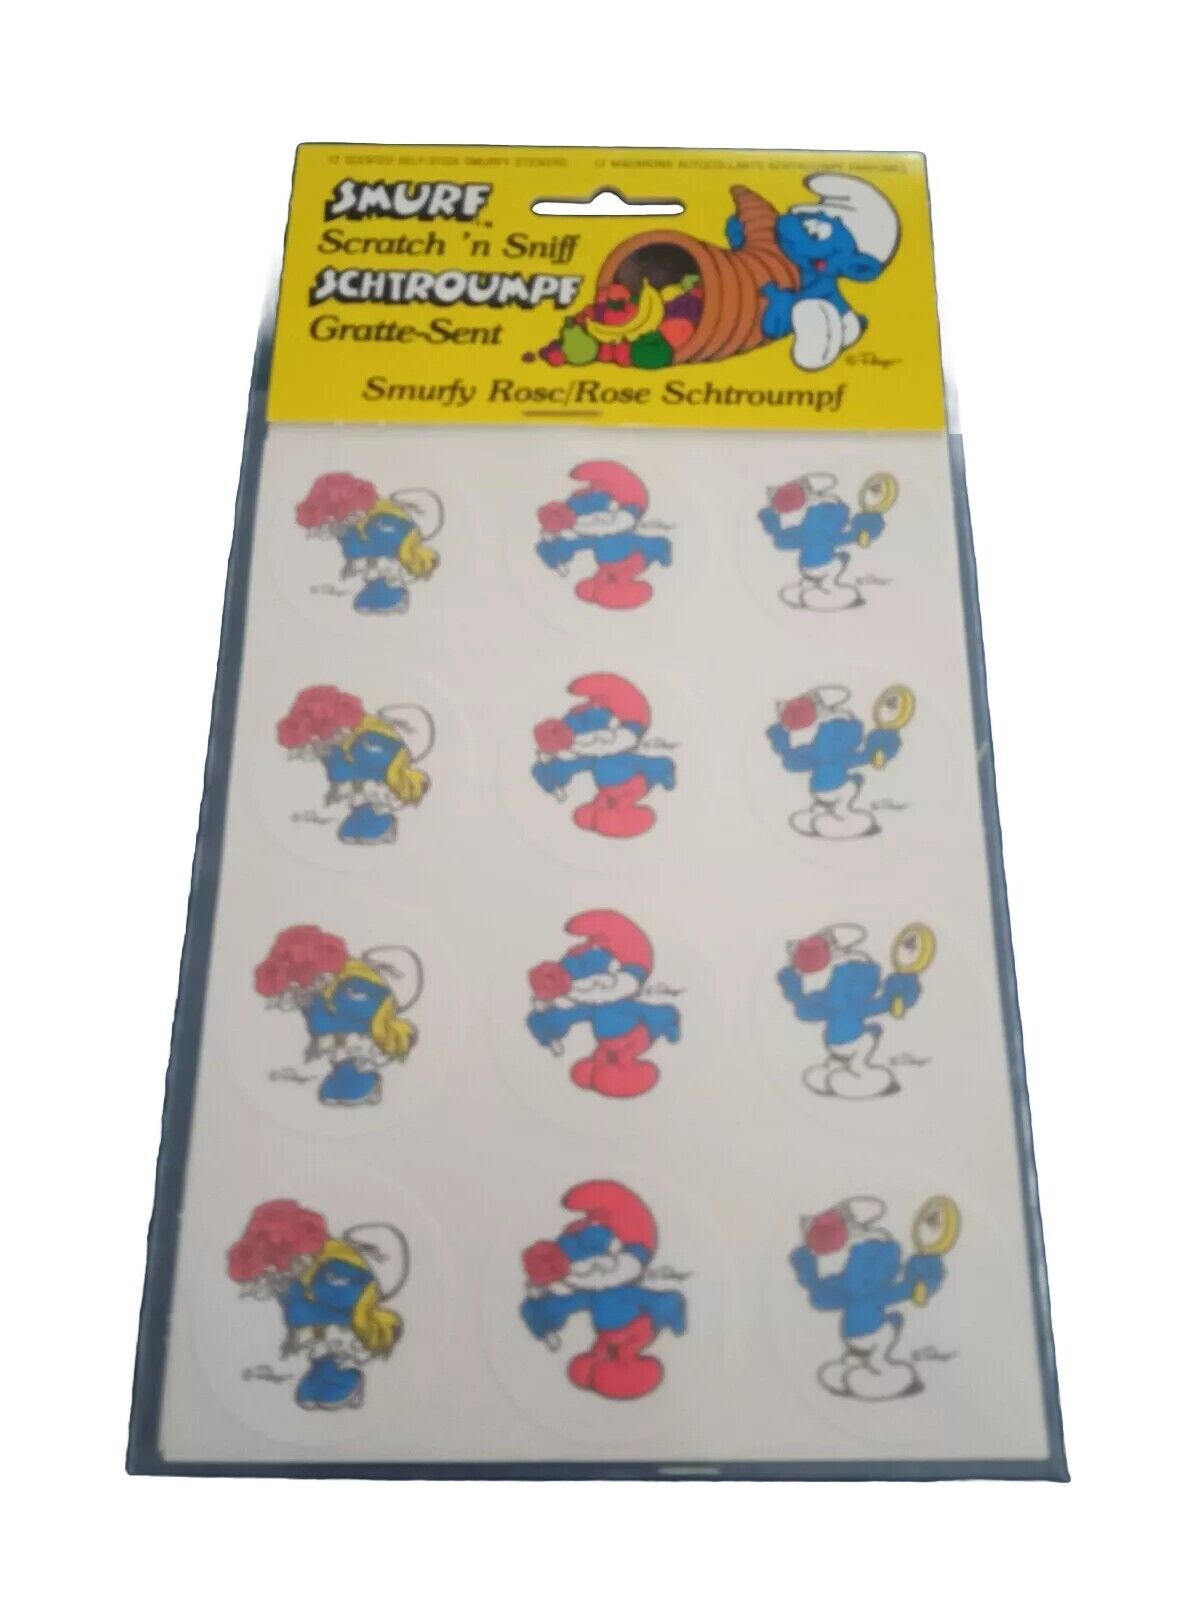 Vintage 1982 Smurf Scratch And Sniff Stickers Smurfy Rose Scent- UNOPENED